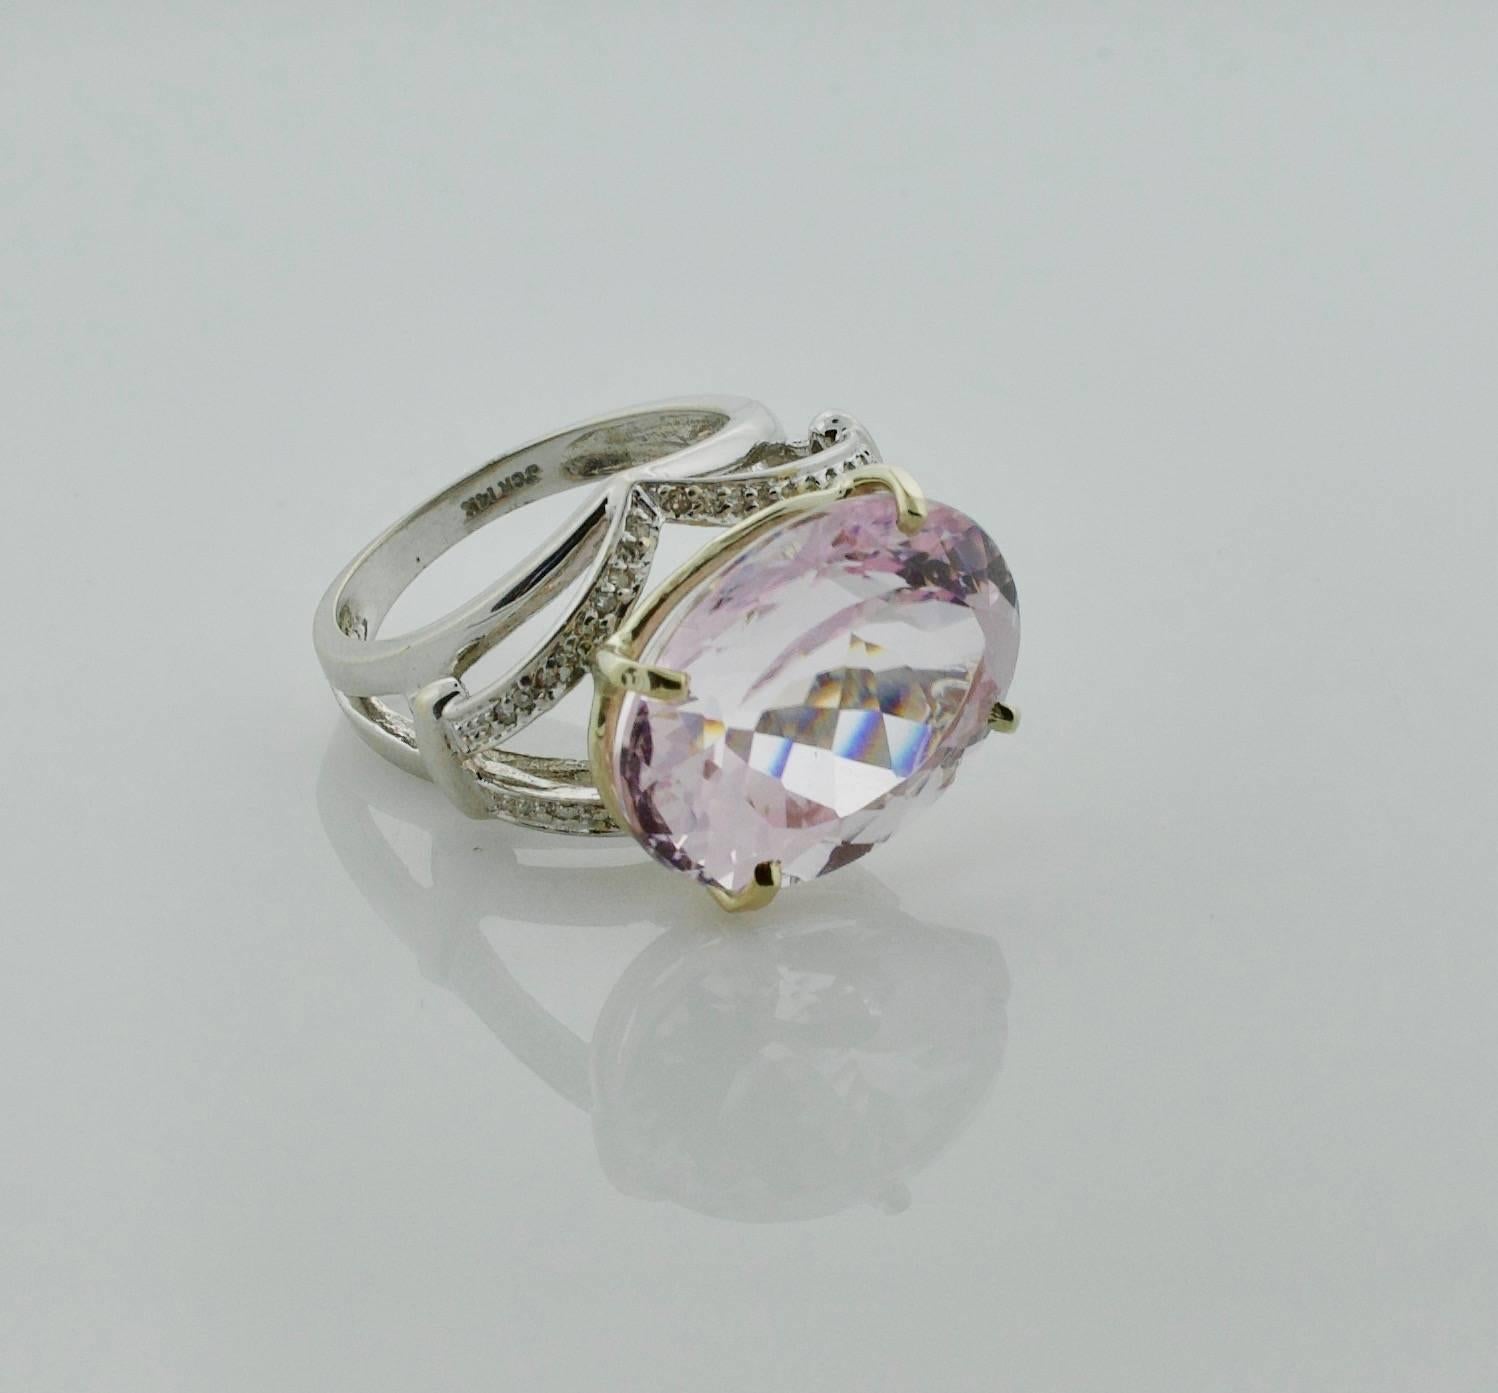 20 carat Oval Kunzite and Diamond Ring in White Gold
Featuring a 20 carat (approximately)
Thirty Six Round Cut Diamonds weighing .20 carats approximately
Currently size 9.  We will size it free of charge.
Lots of Fun with This Large Stone Ring 